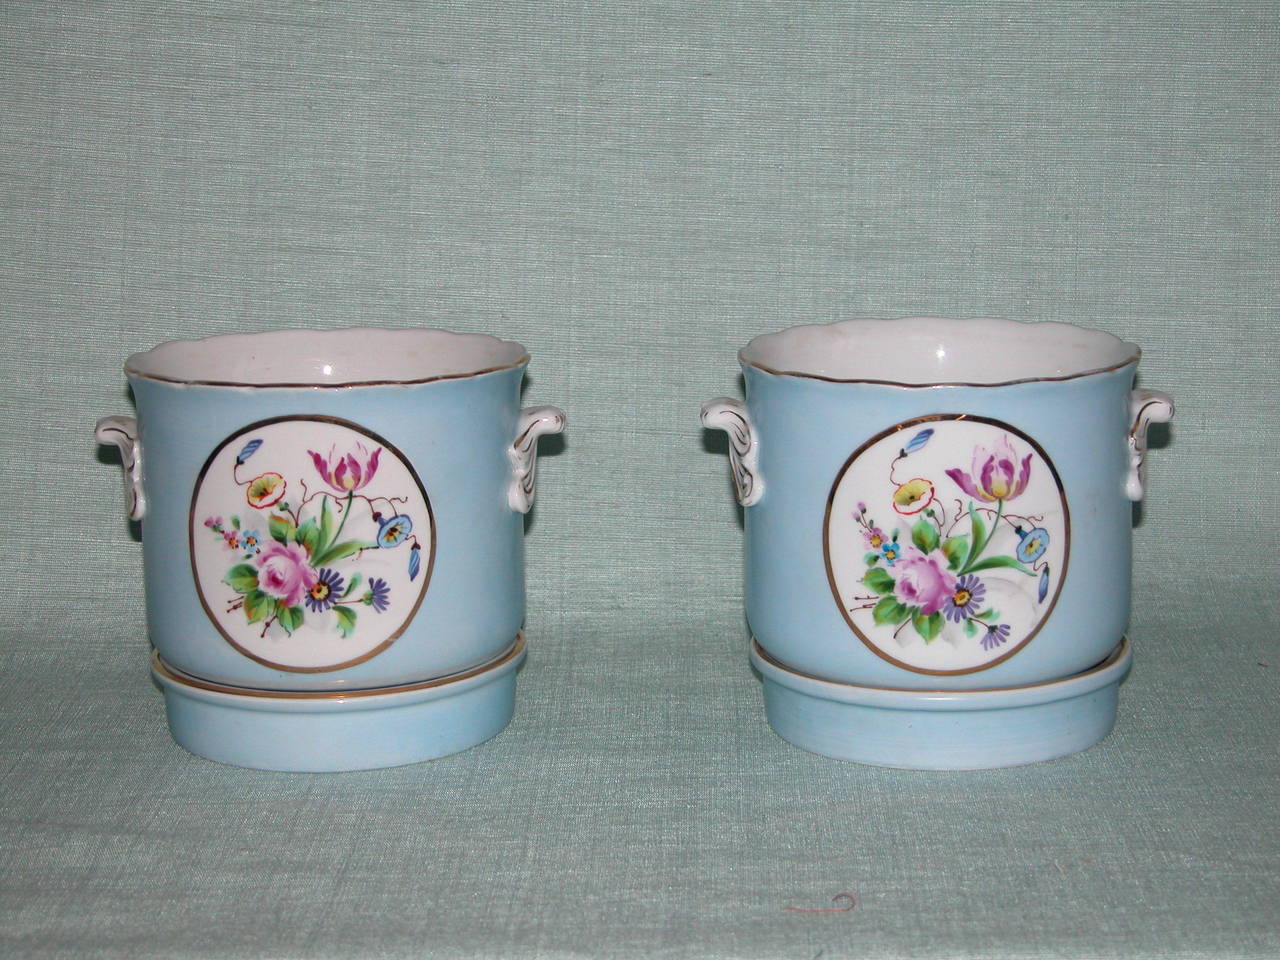 Pair of mint condition porcelain cachepot in a soft periwinkle color, with original saucers. Beautiful hand-painted floral designs on both front and back of pots.